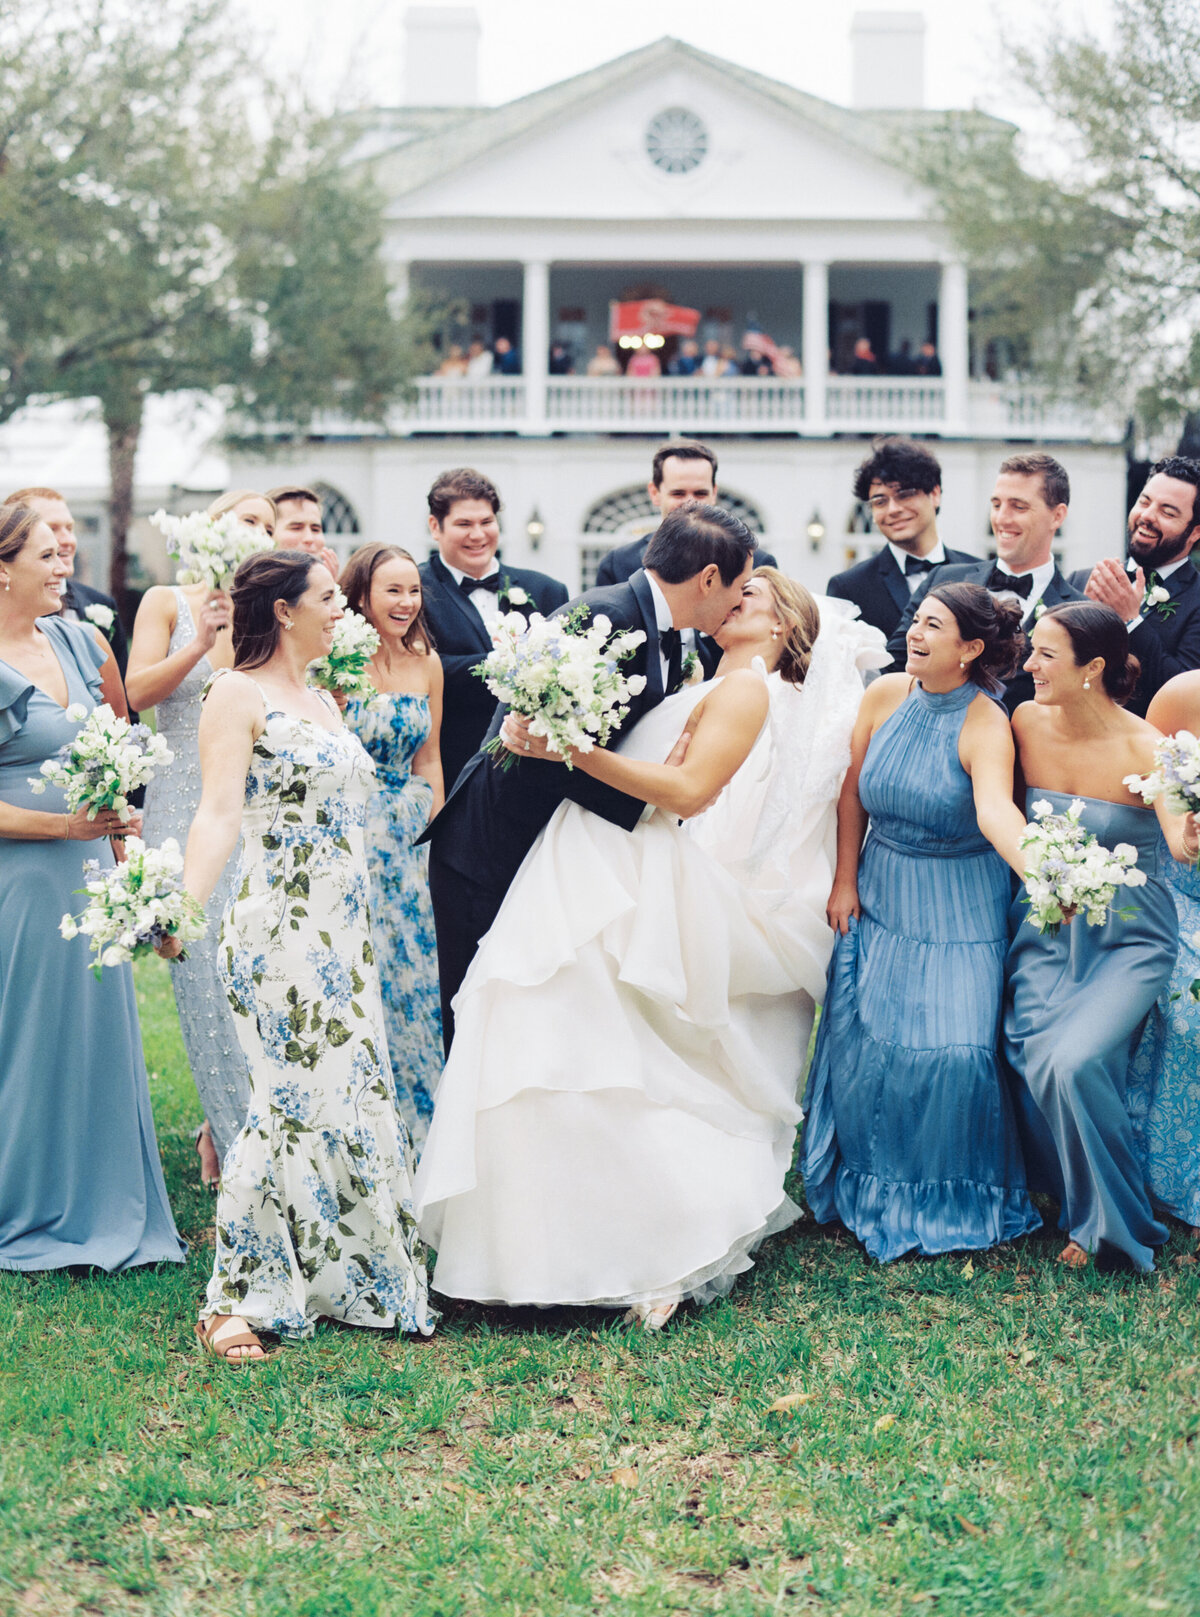 Full bridal party group photo dip kiss in front of Lowndes Grove. Bridesmaids in mix-matched blue dresses and groomsmen in classic tuxedos.